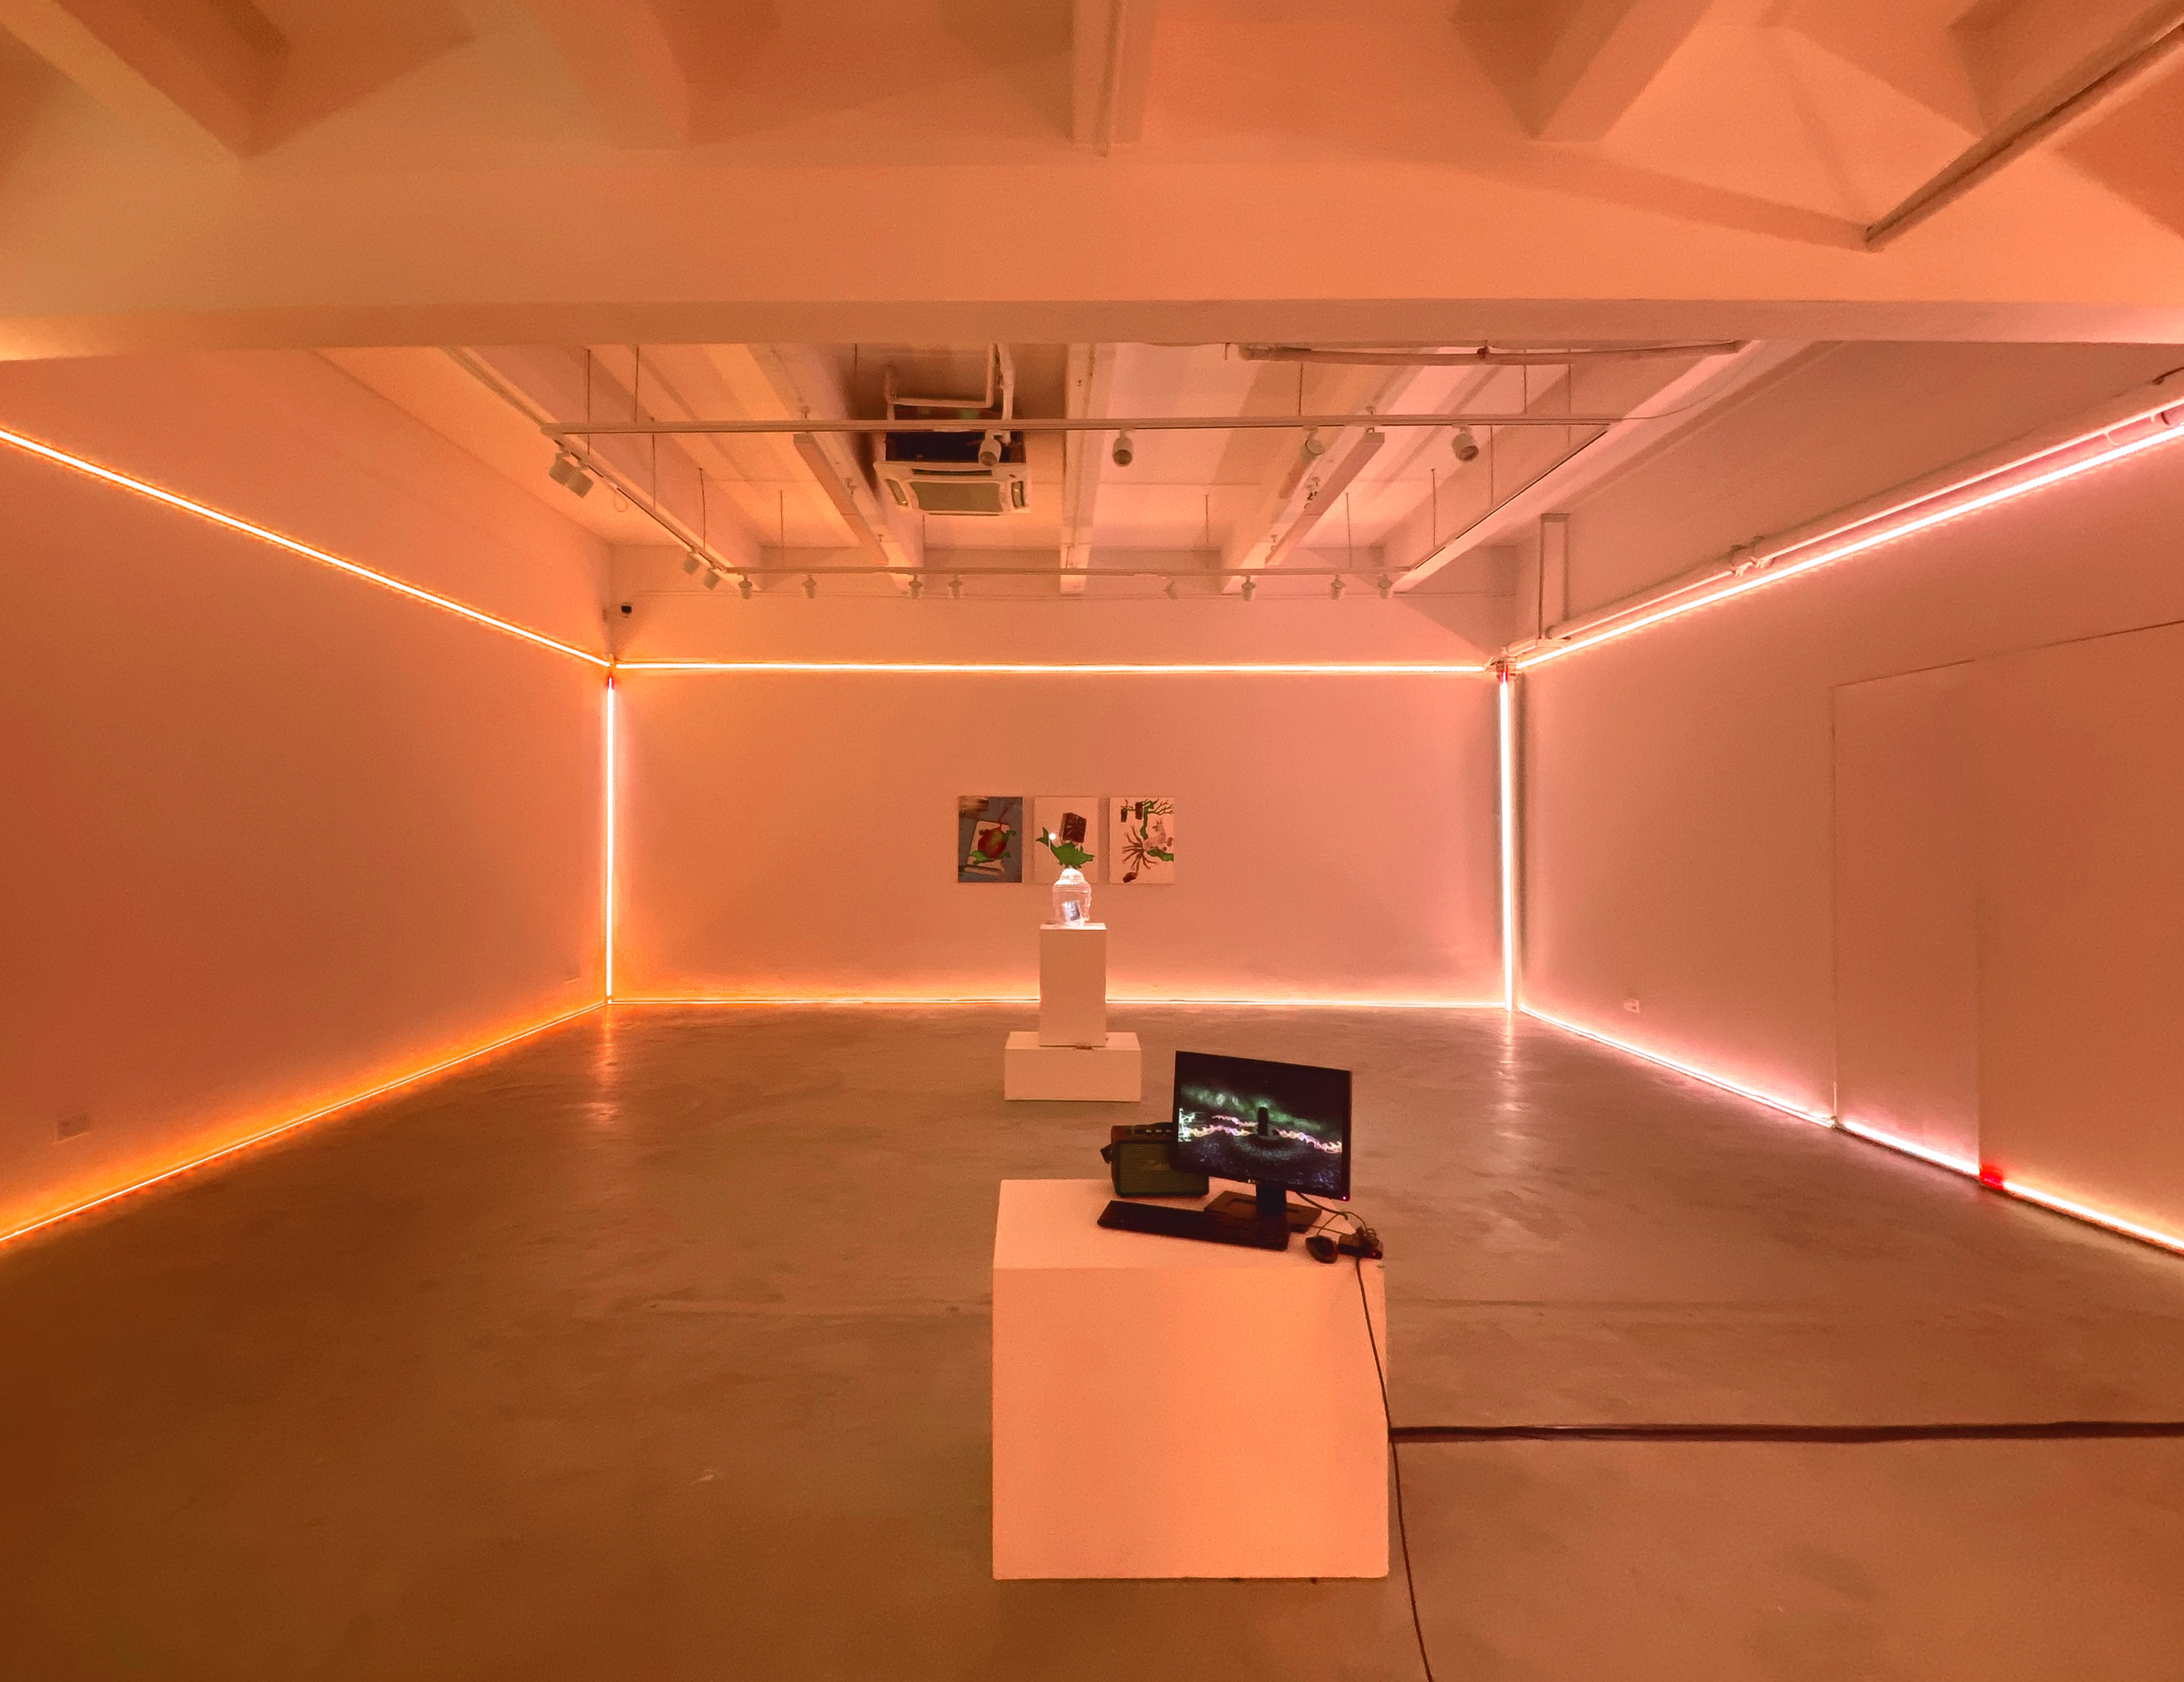 Installation view of Unproven Fallacy is Scientific